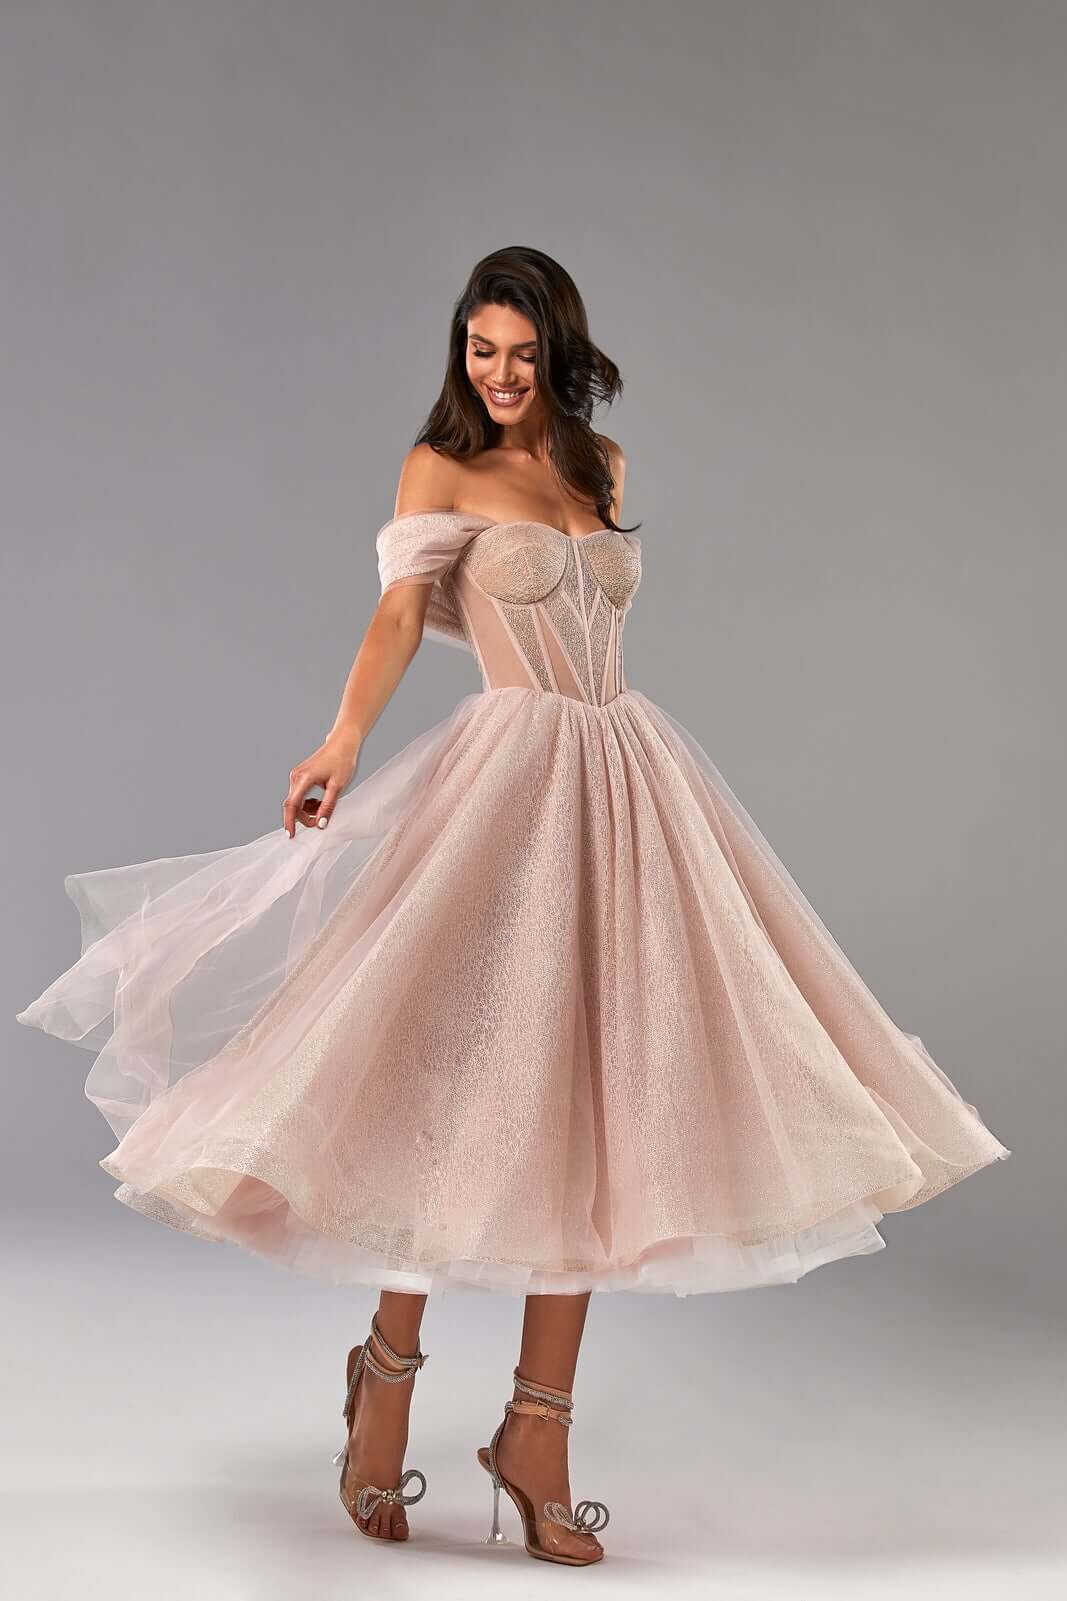 Combination sparkly tulle dress